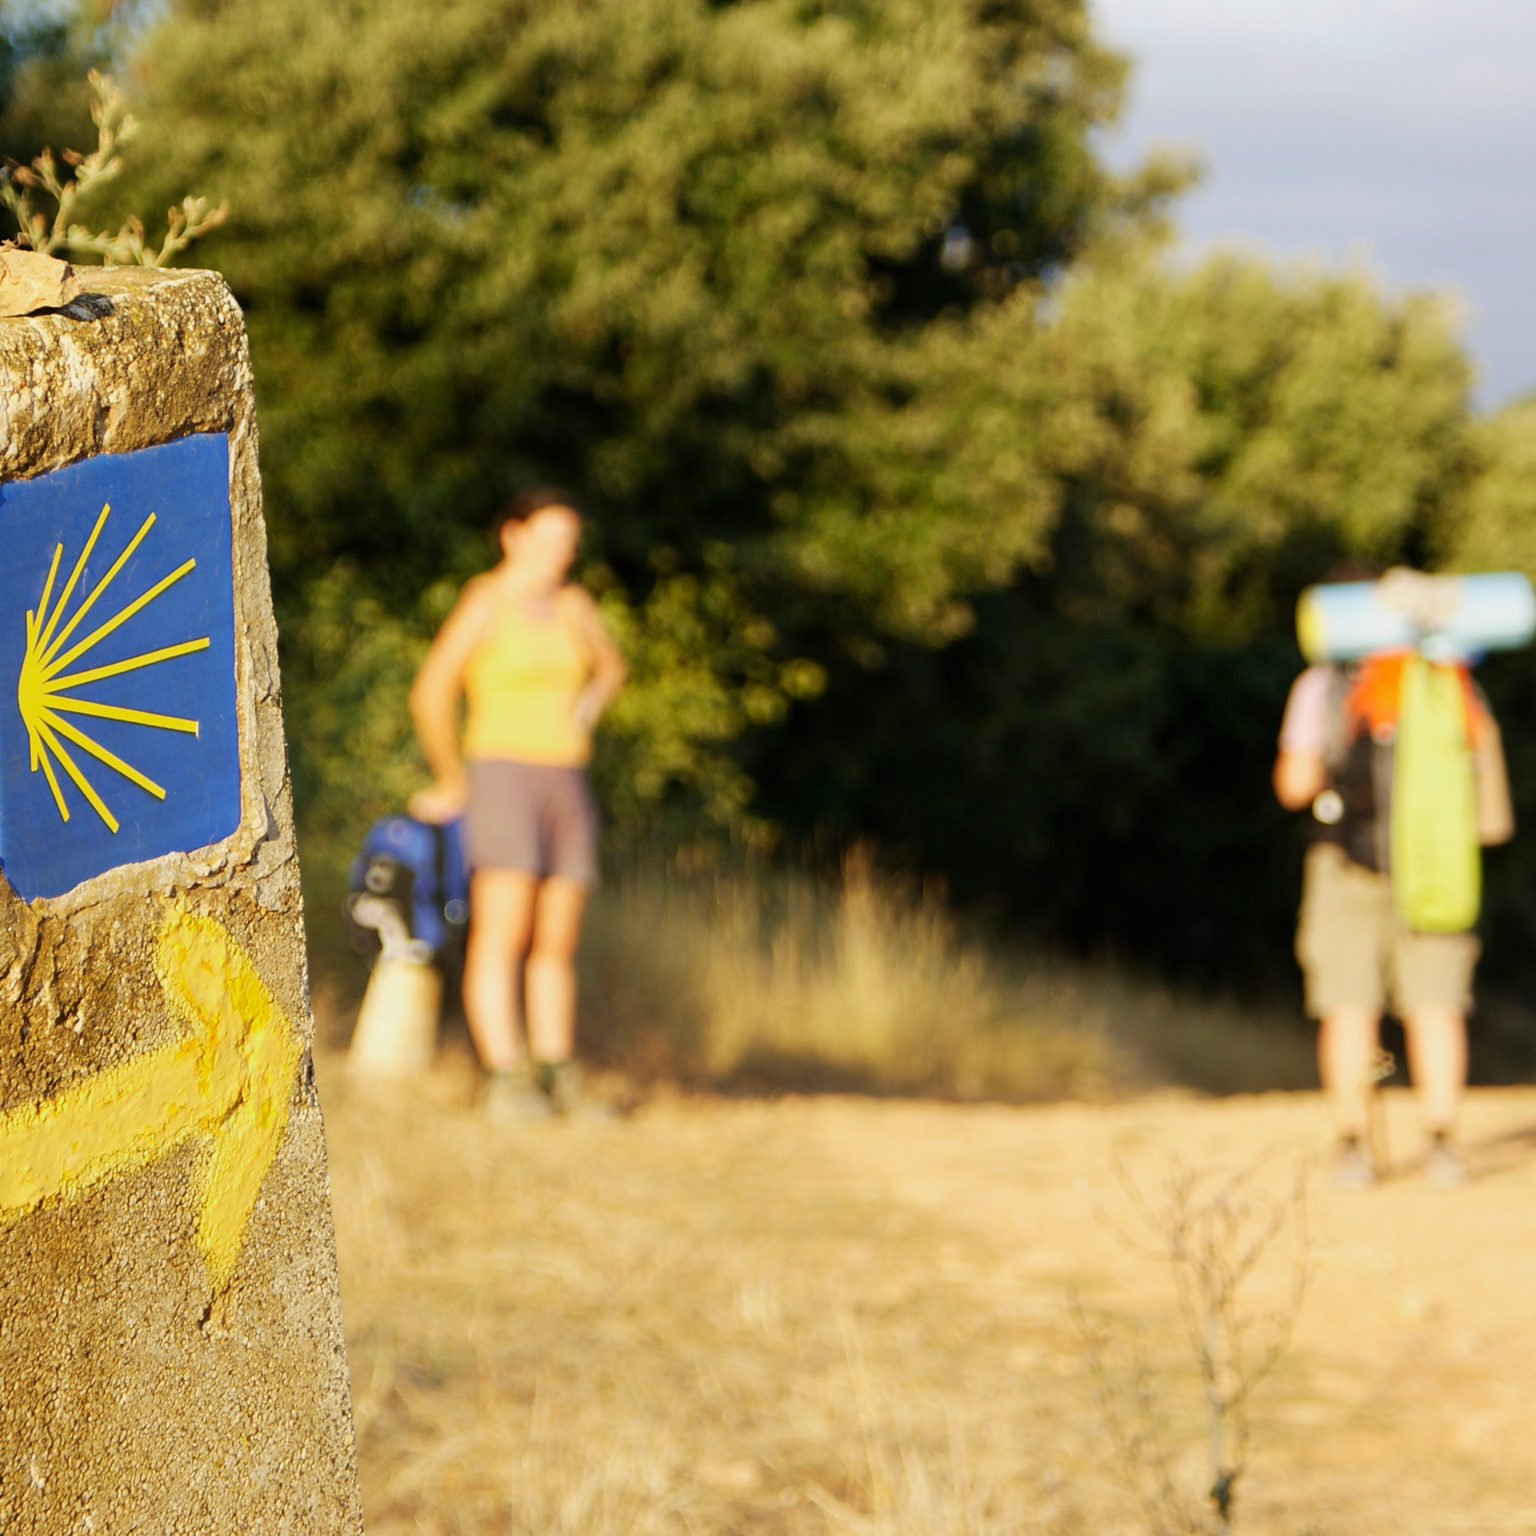 Hikers on the Camino de Santiago with signposting and arrow pointing the way